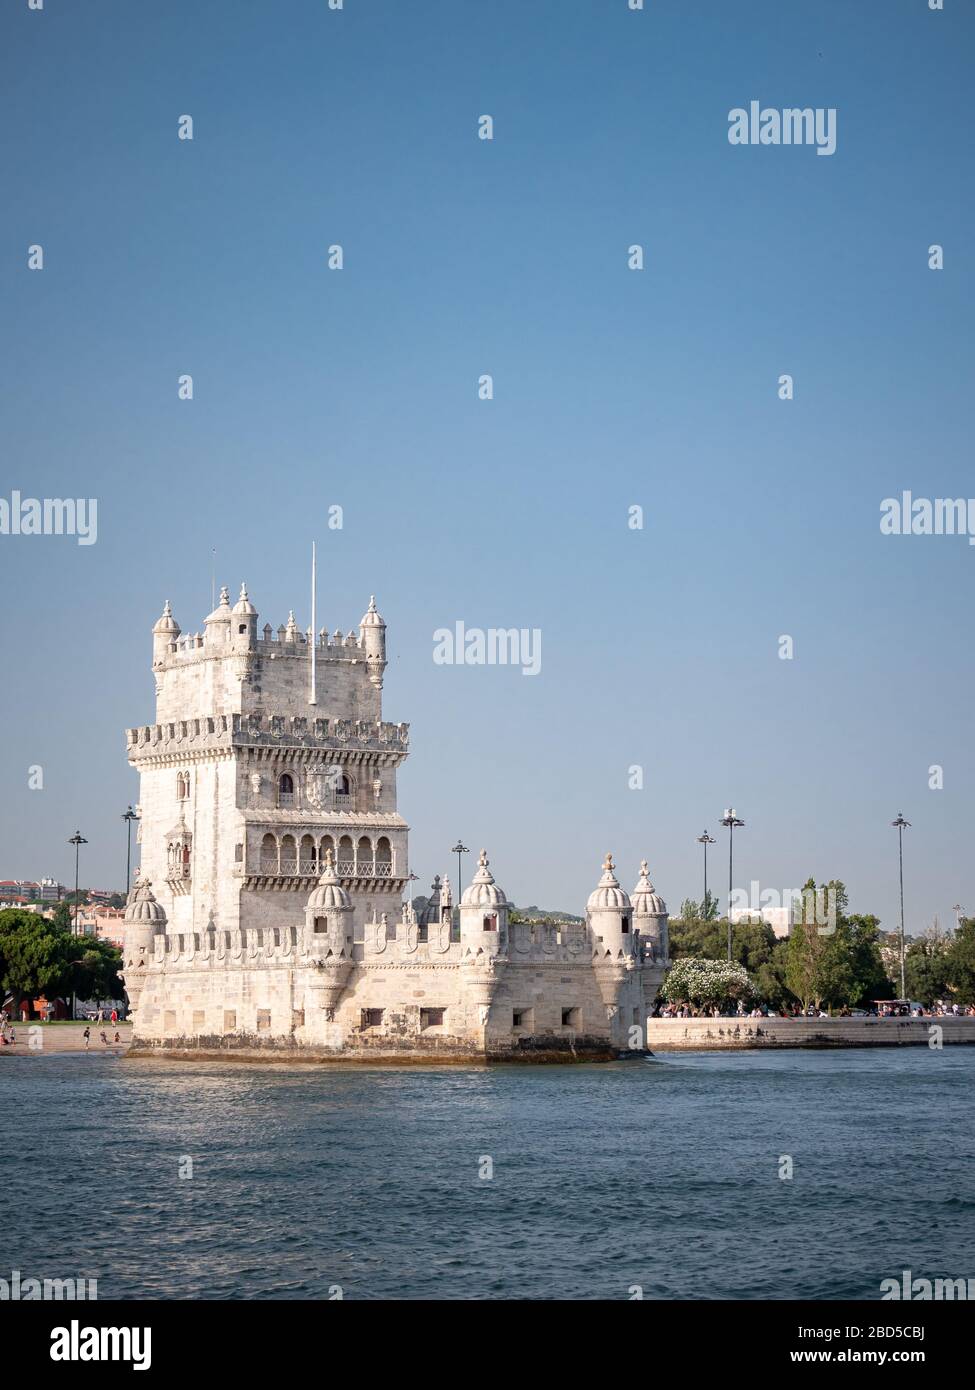 Torre de Belem, Lisboa, Portugal. A view of the popular Lisbon landmark, The Belem Tower, taken from a vantage point on the River Tagus. Stock Photo